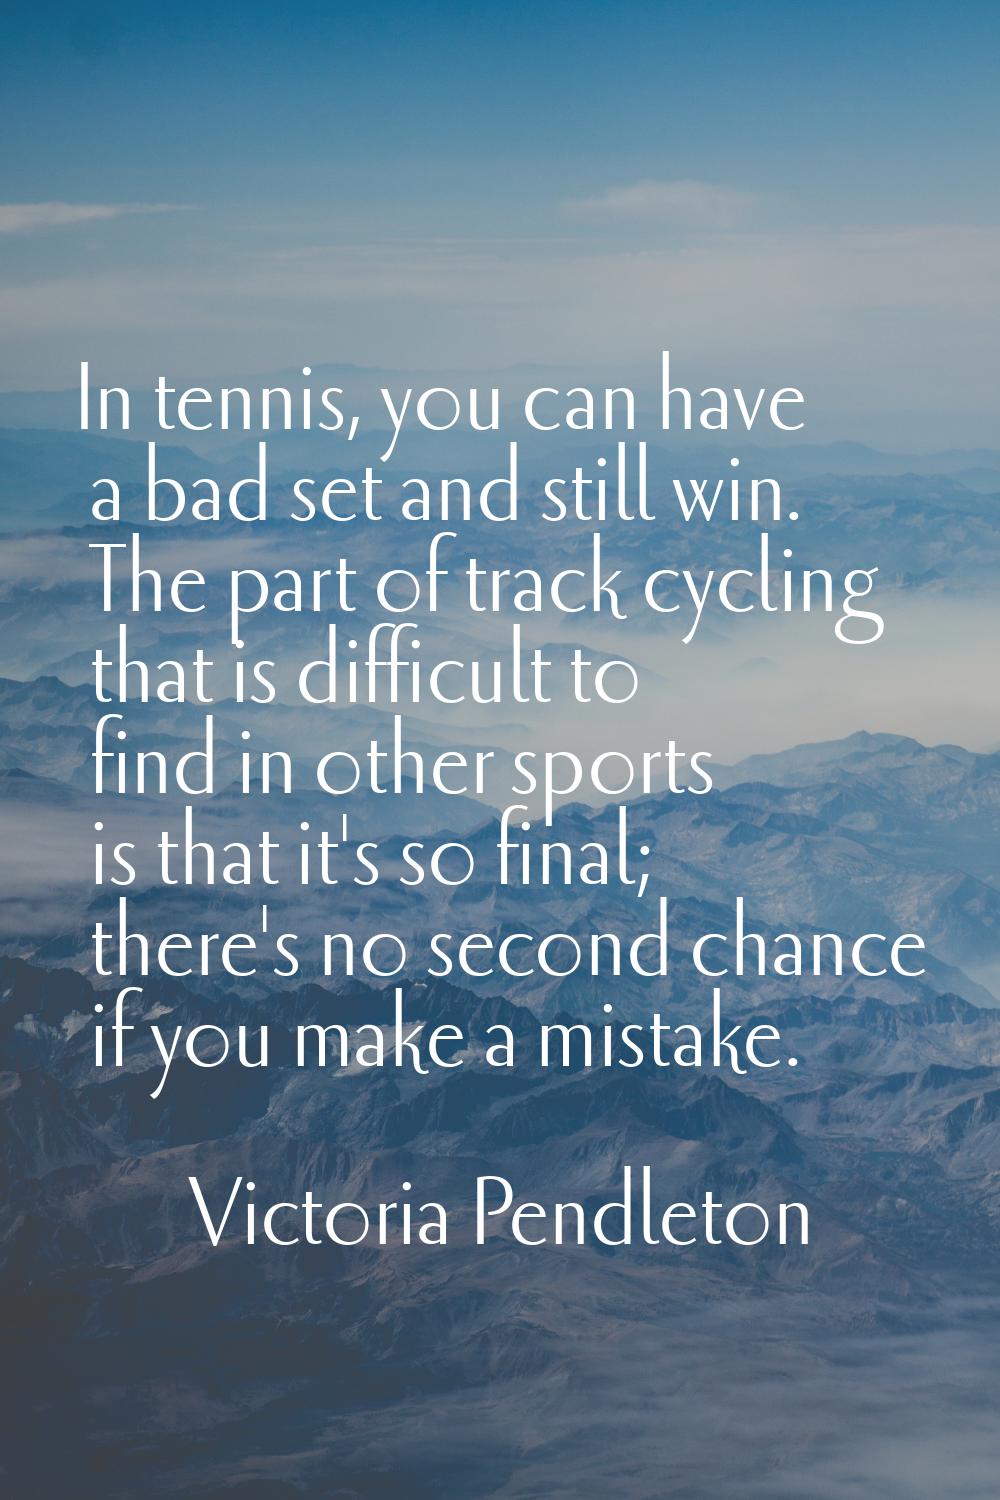 In tennis, you can have a bad set and still win. The part of track cycling that is difficult to fin